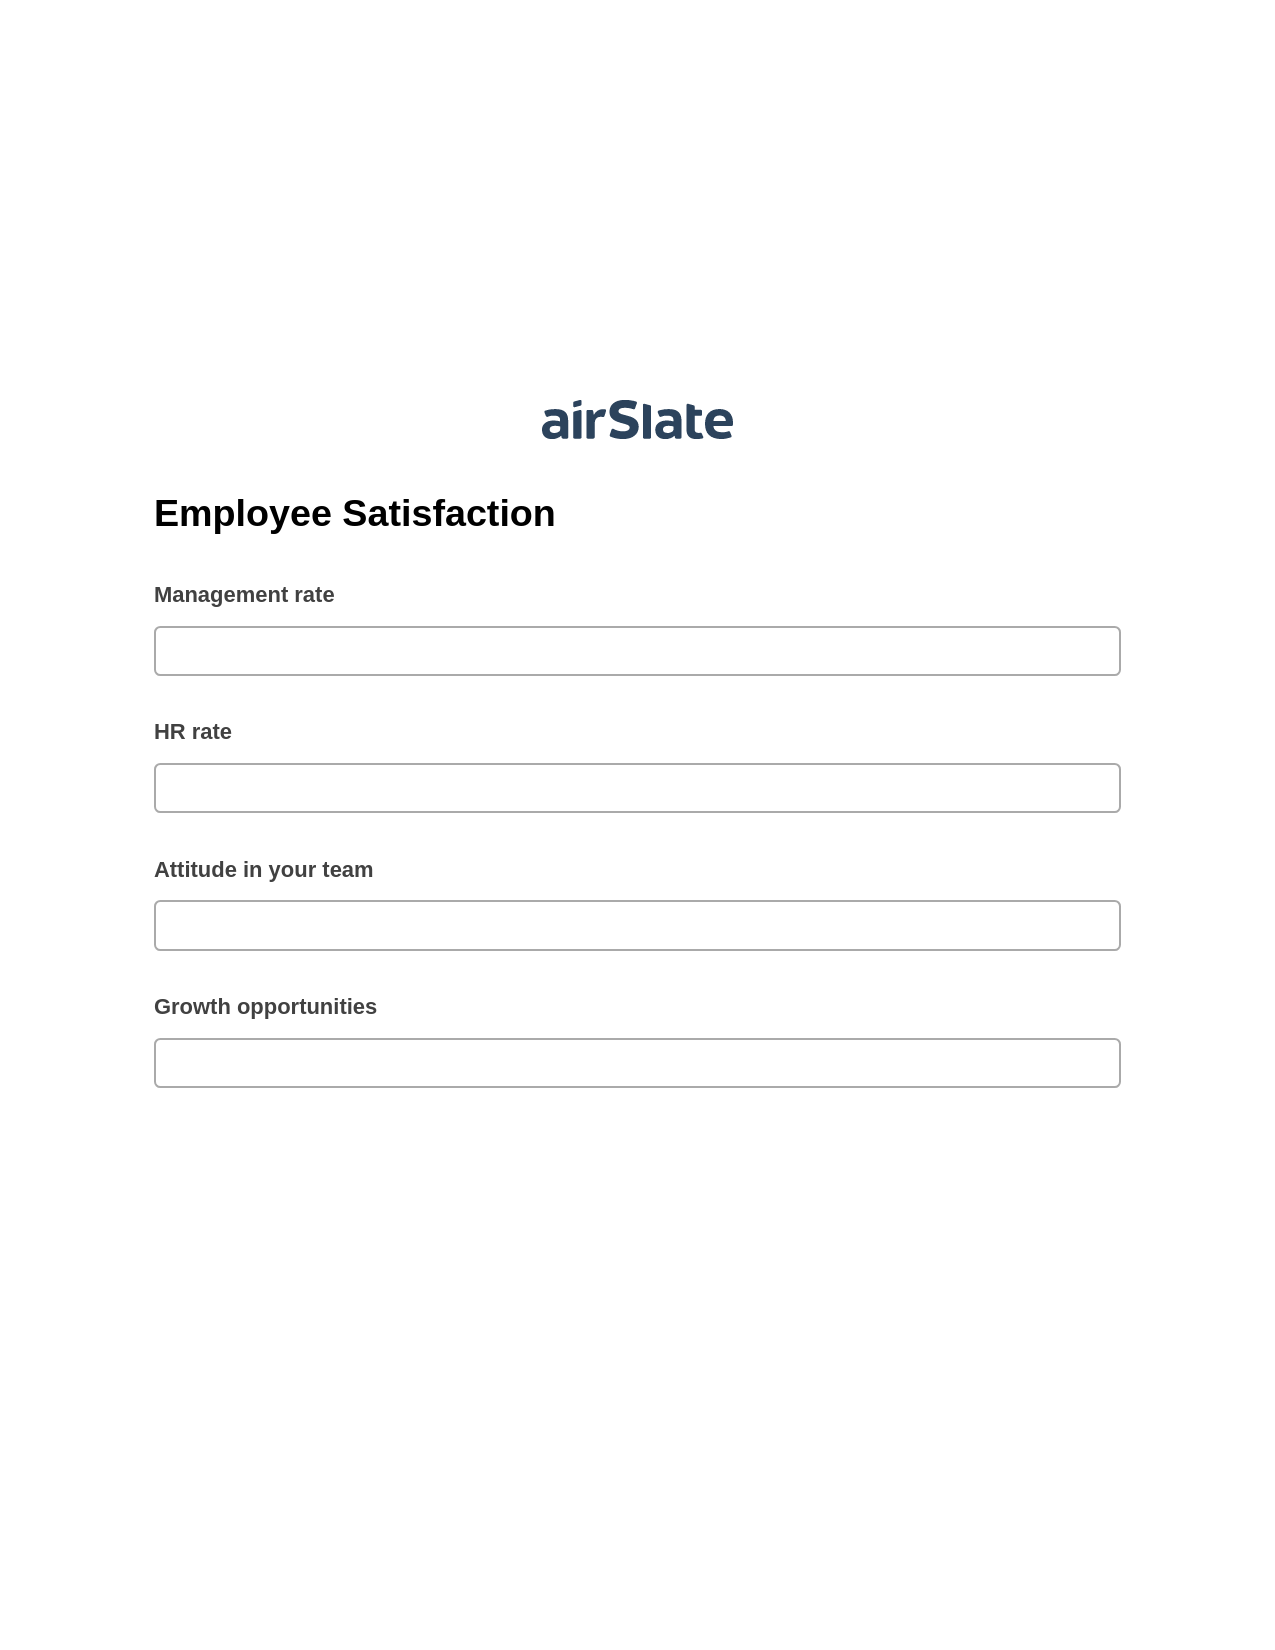 Employee Satisfaction Pre-fill from Google Sheets Bot, Email Notification Bot, Export to Formstack Documents Bot